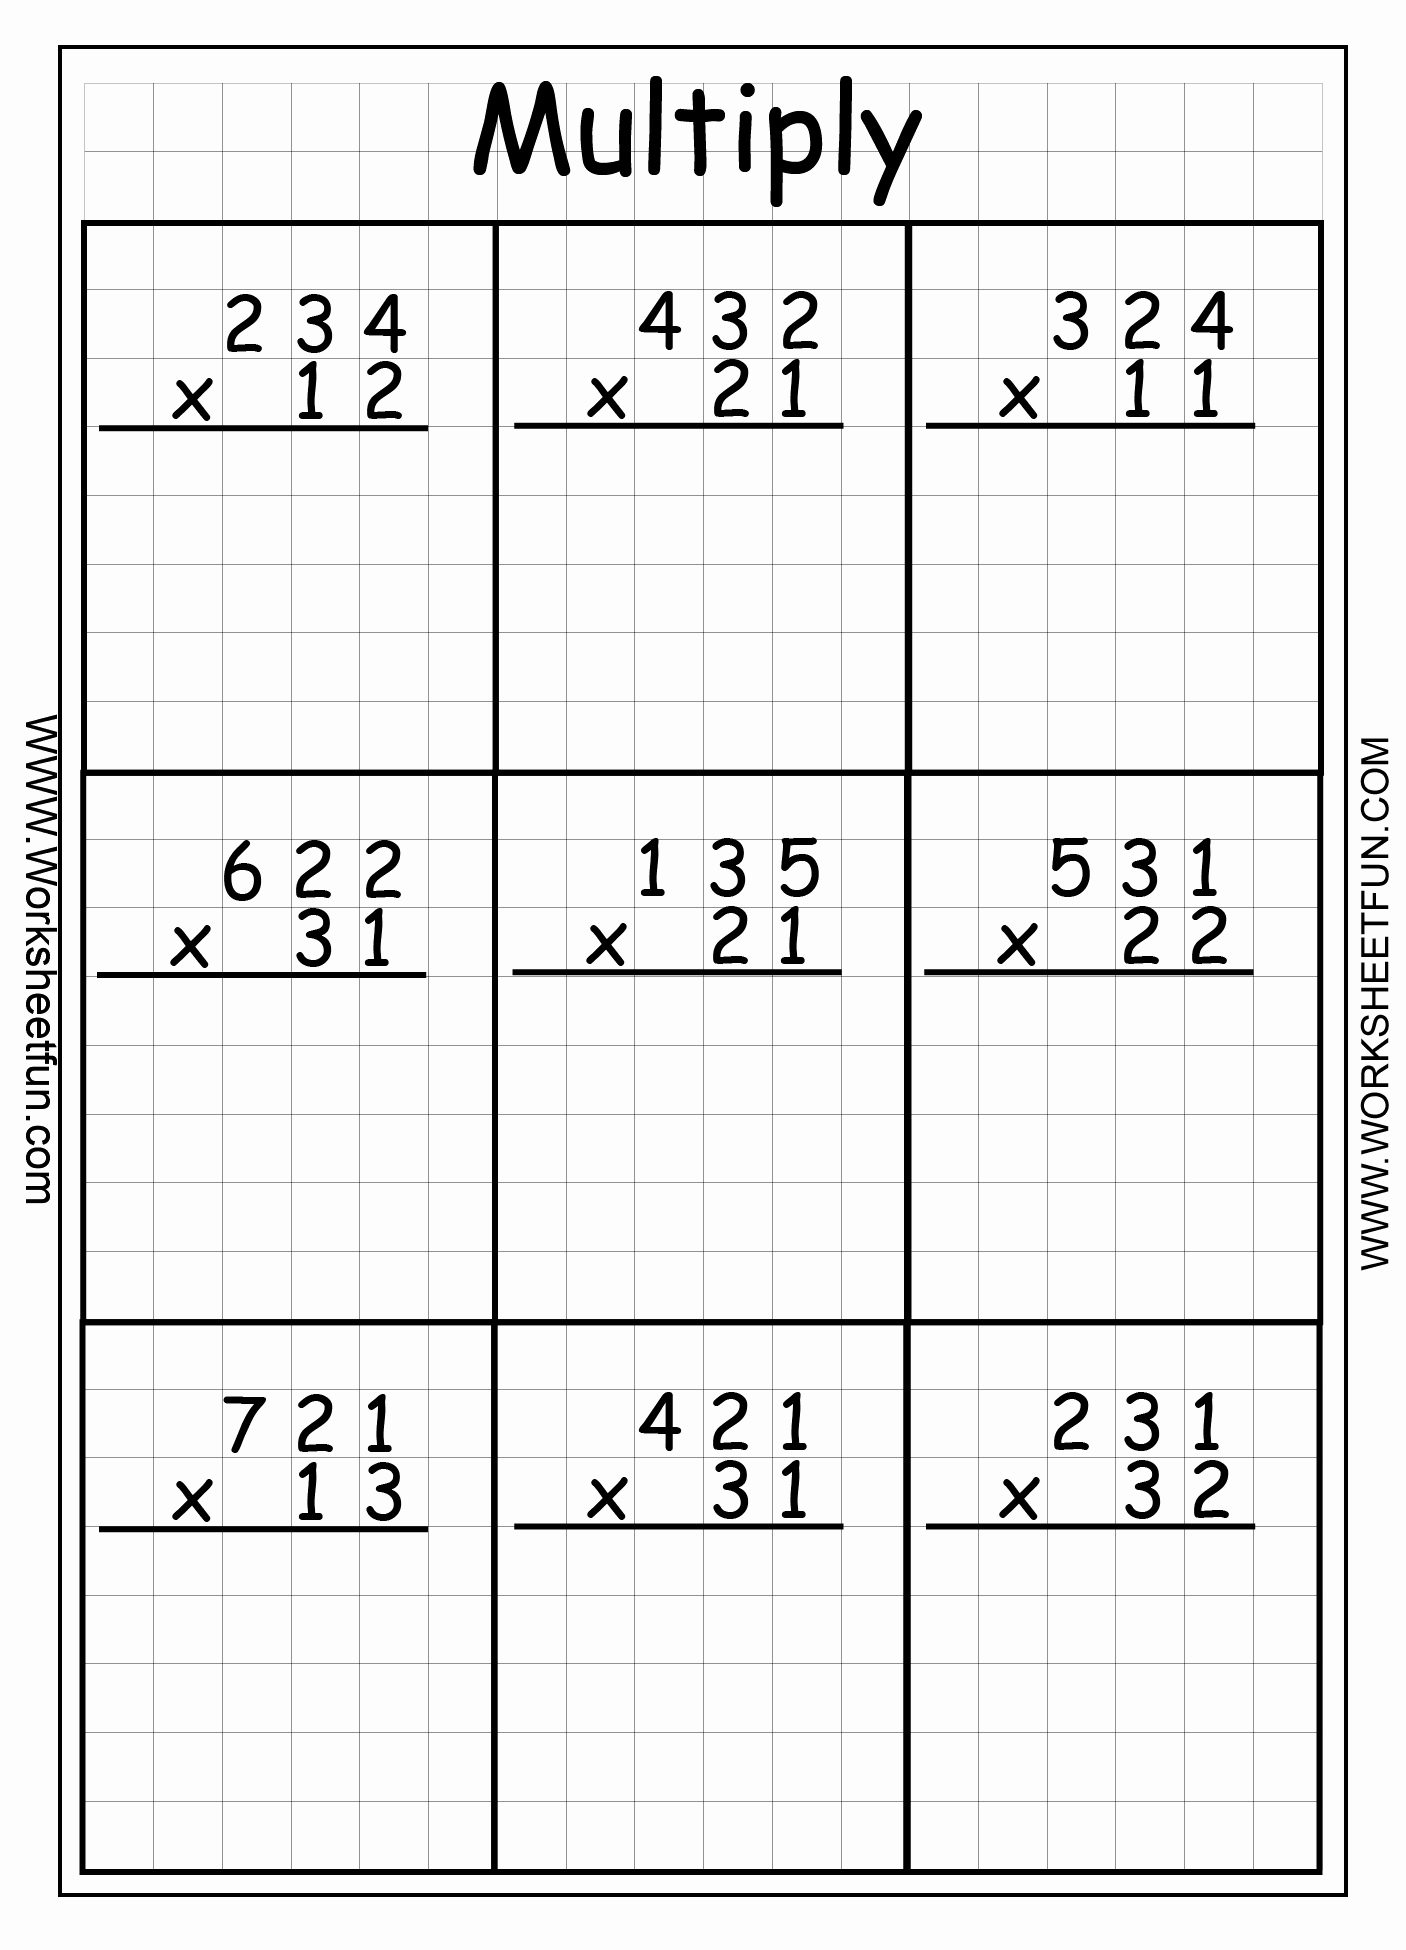 Common Core Elementary Math Examples - Adding And Subtracting | Free Printable Double Digit Multiplication Worksheets